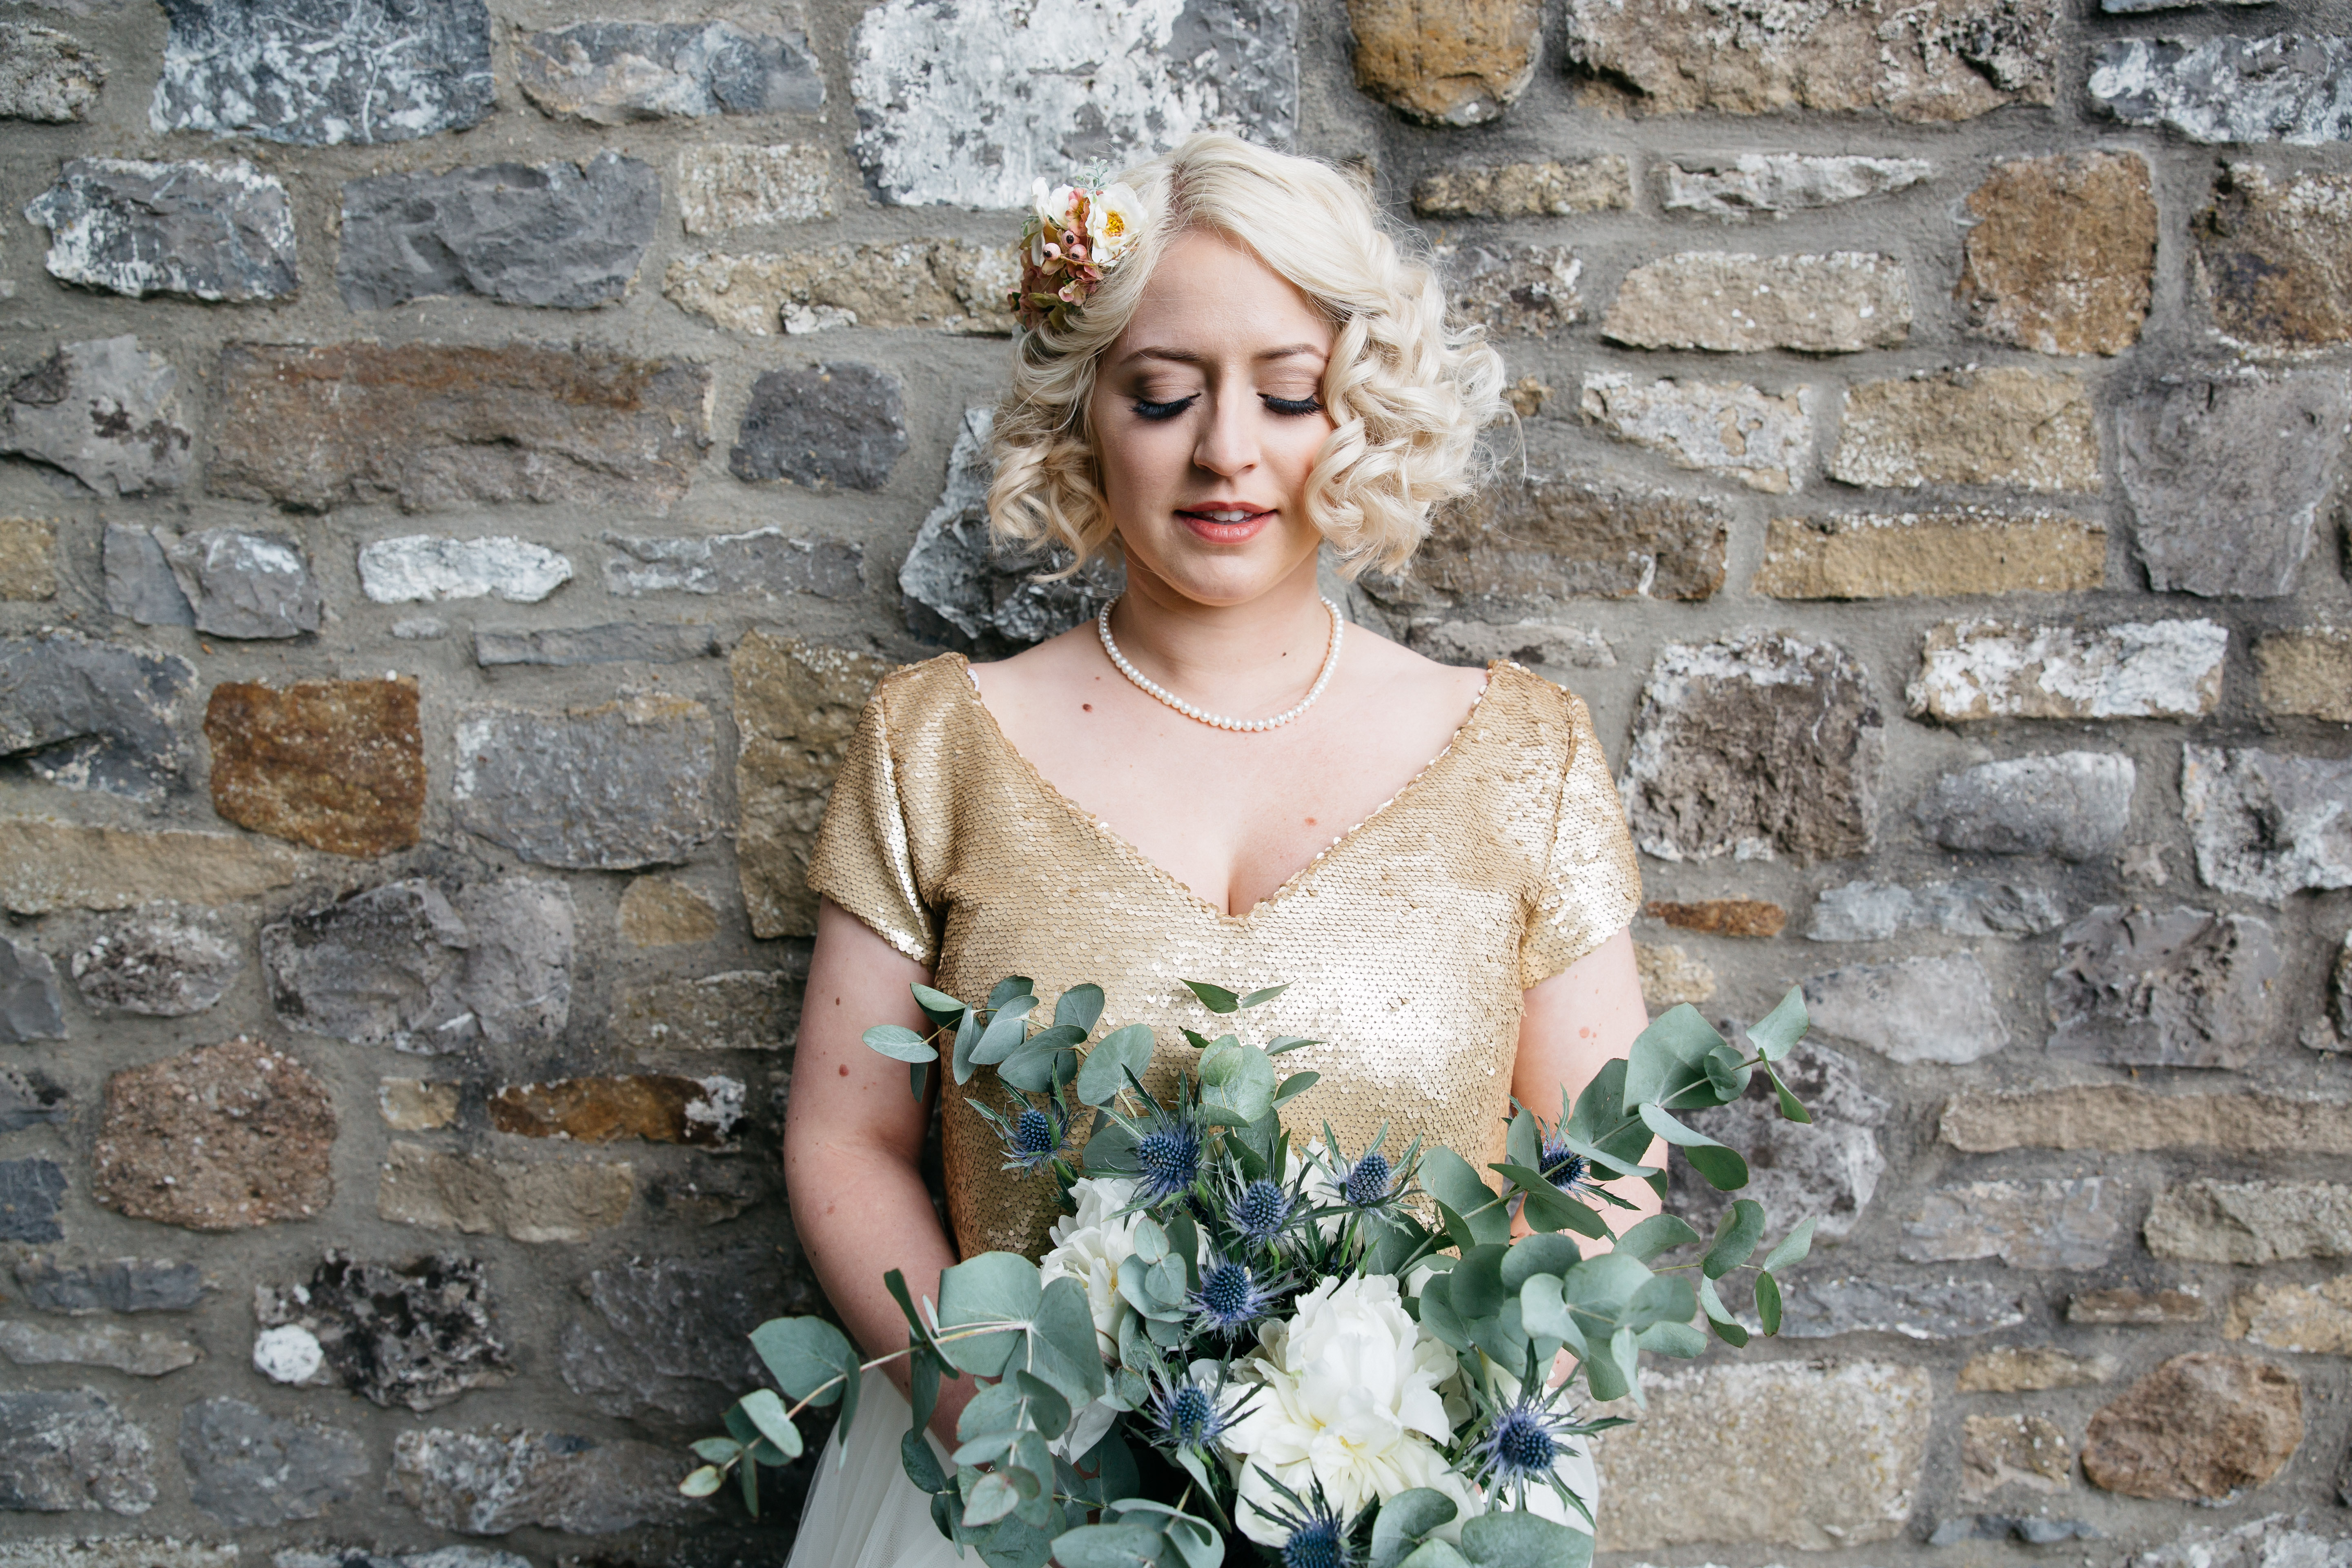 A Summer Wedding Soiree at Broughton Hall, Yorkshire